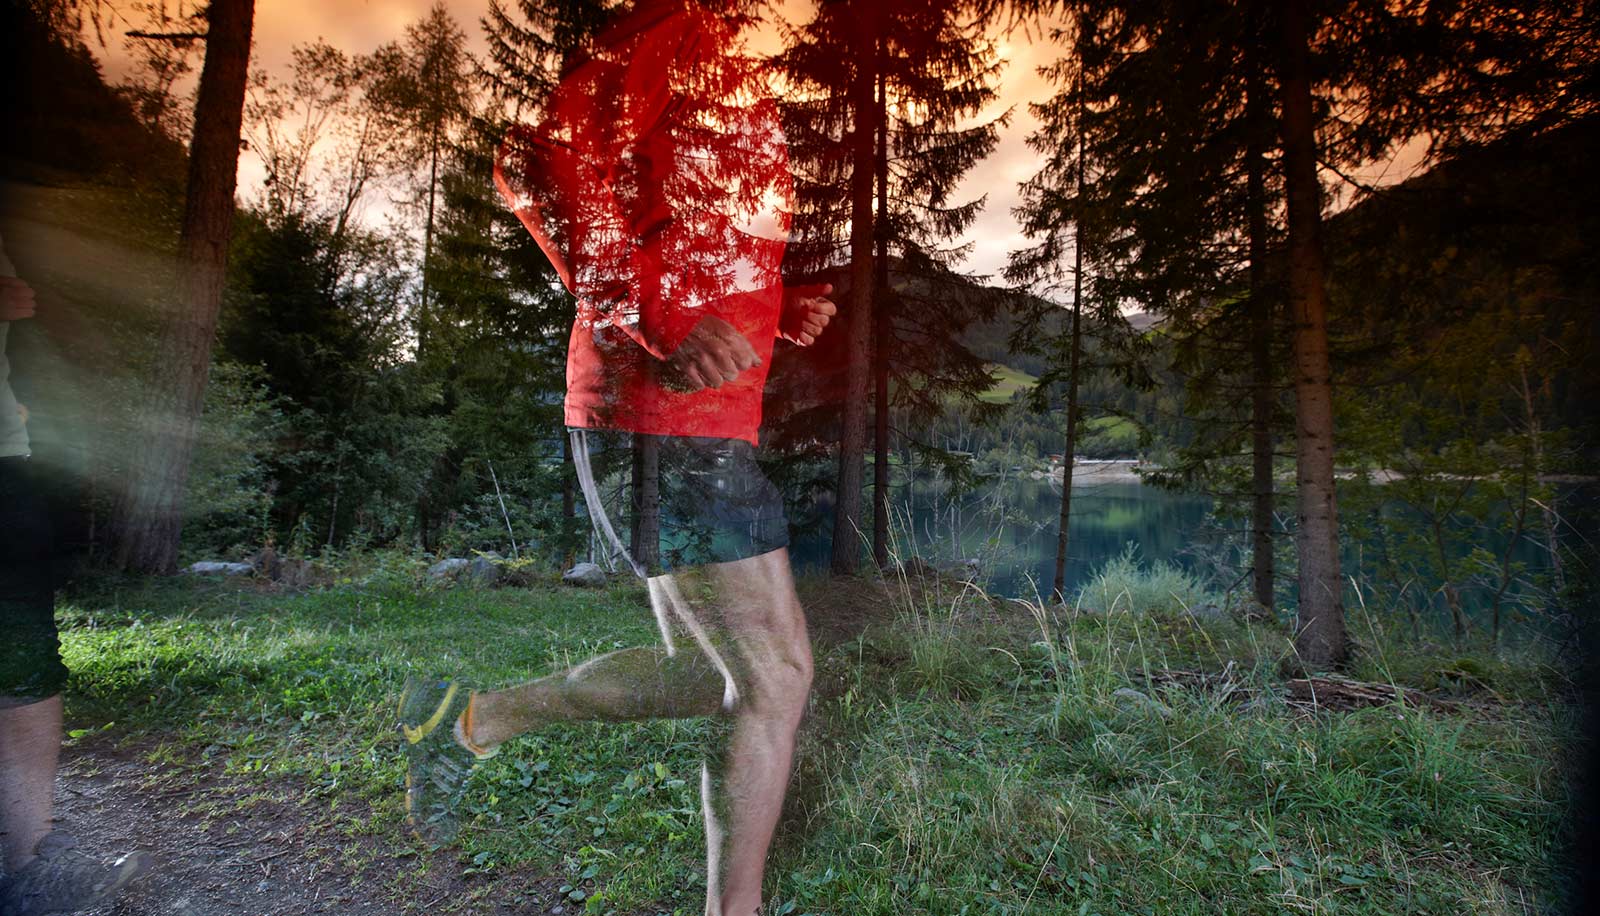 Two images: person jogging in front of woods and a lake in the backgroung